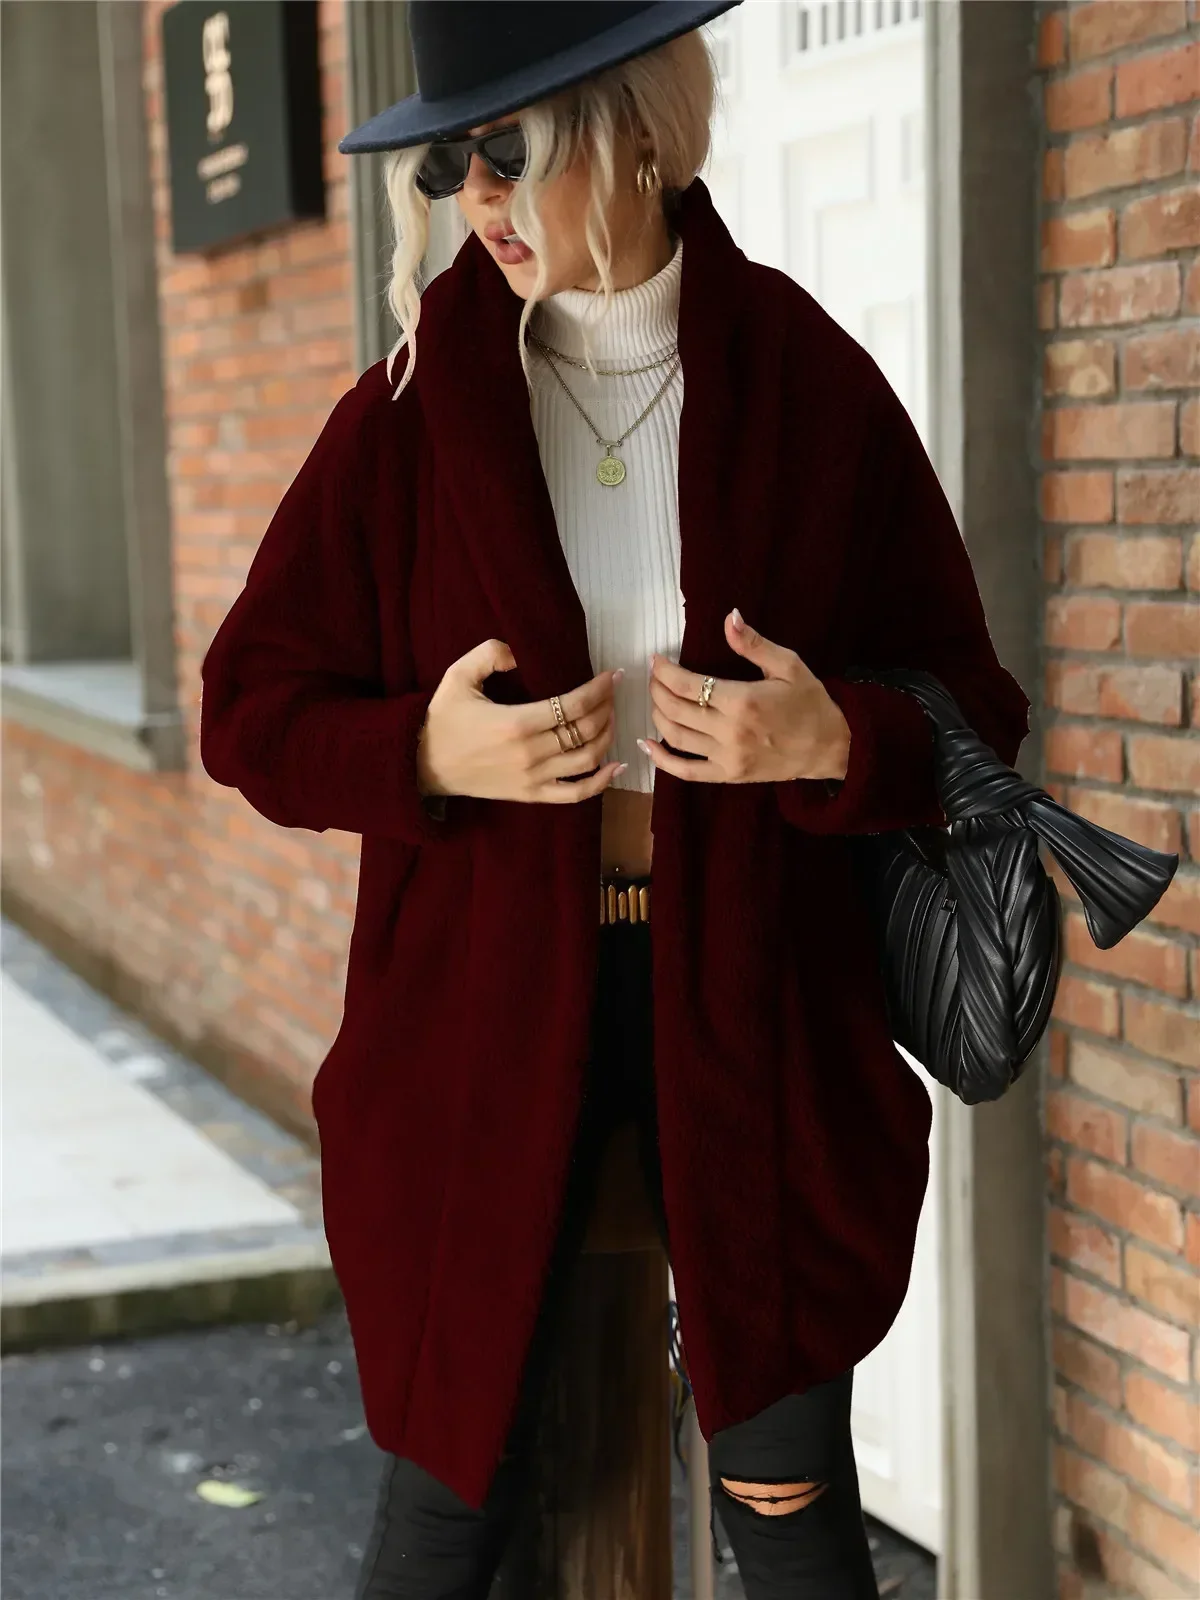 Women's Winter Coats for Women Jackets Bubble Velvet Outerwear Clothing Brown Red Purple Woman Warm Clothes